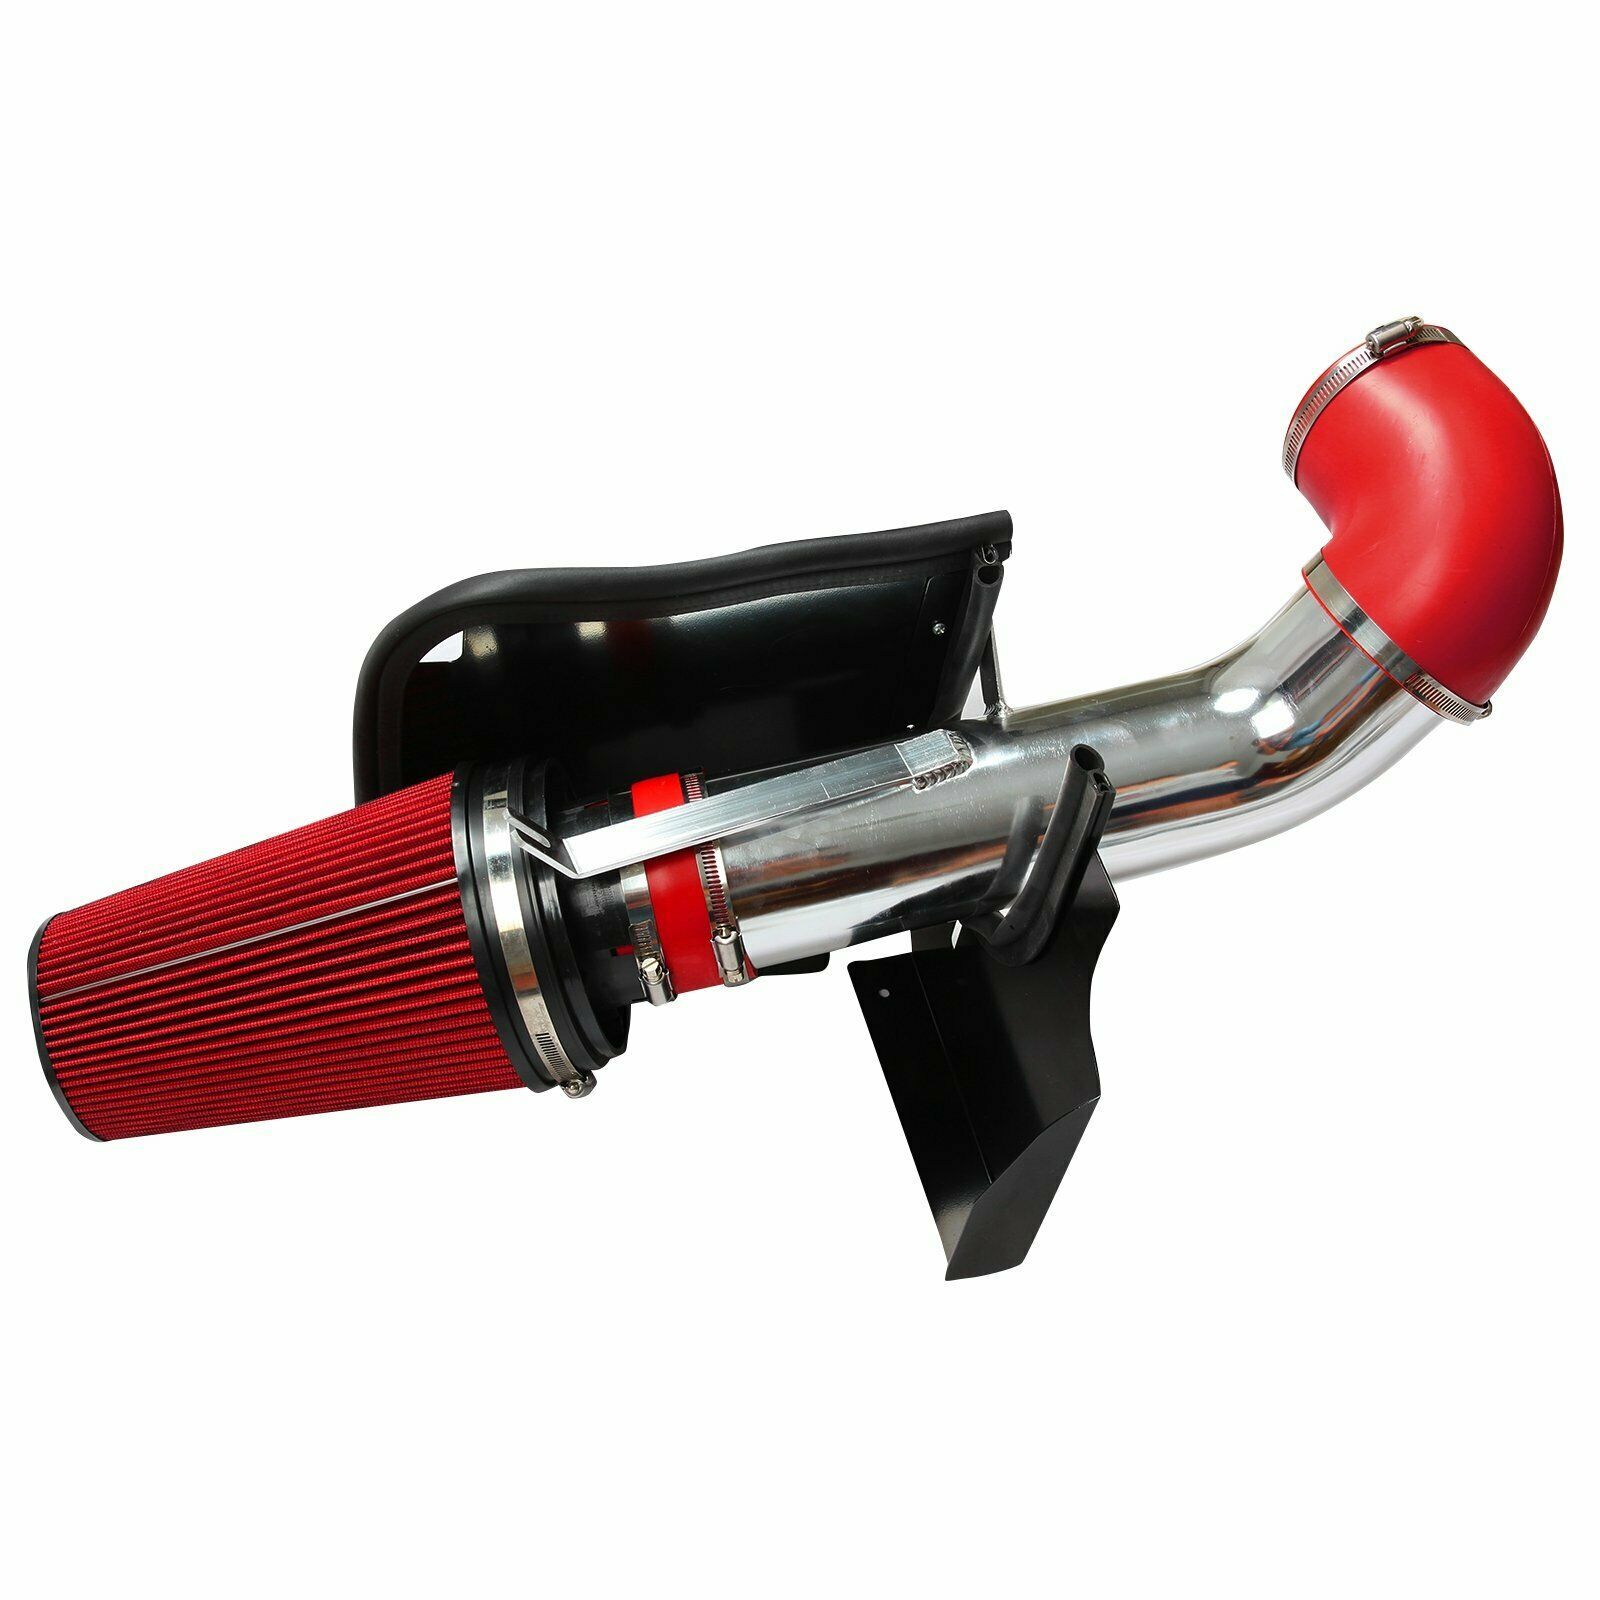 Cold Air Intake System/Kit+Heat Shield Red For 99-06 GMC/Chevy V8 4.8L/5.3L/6.0L